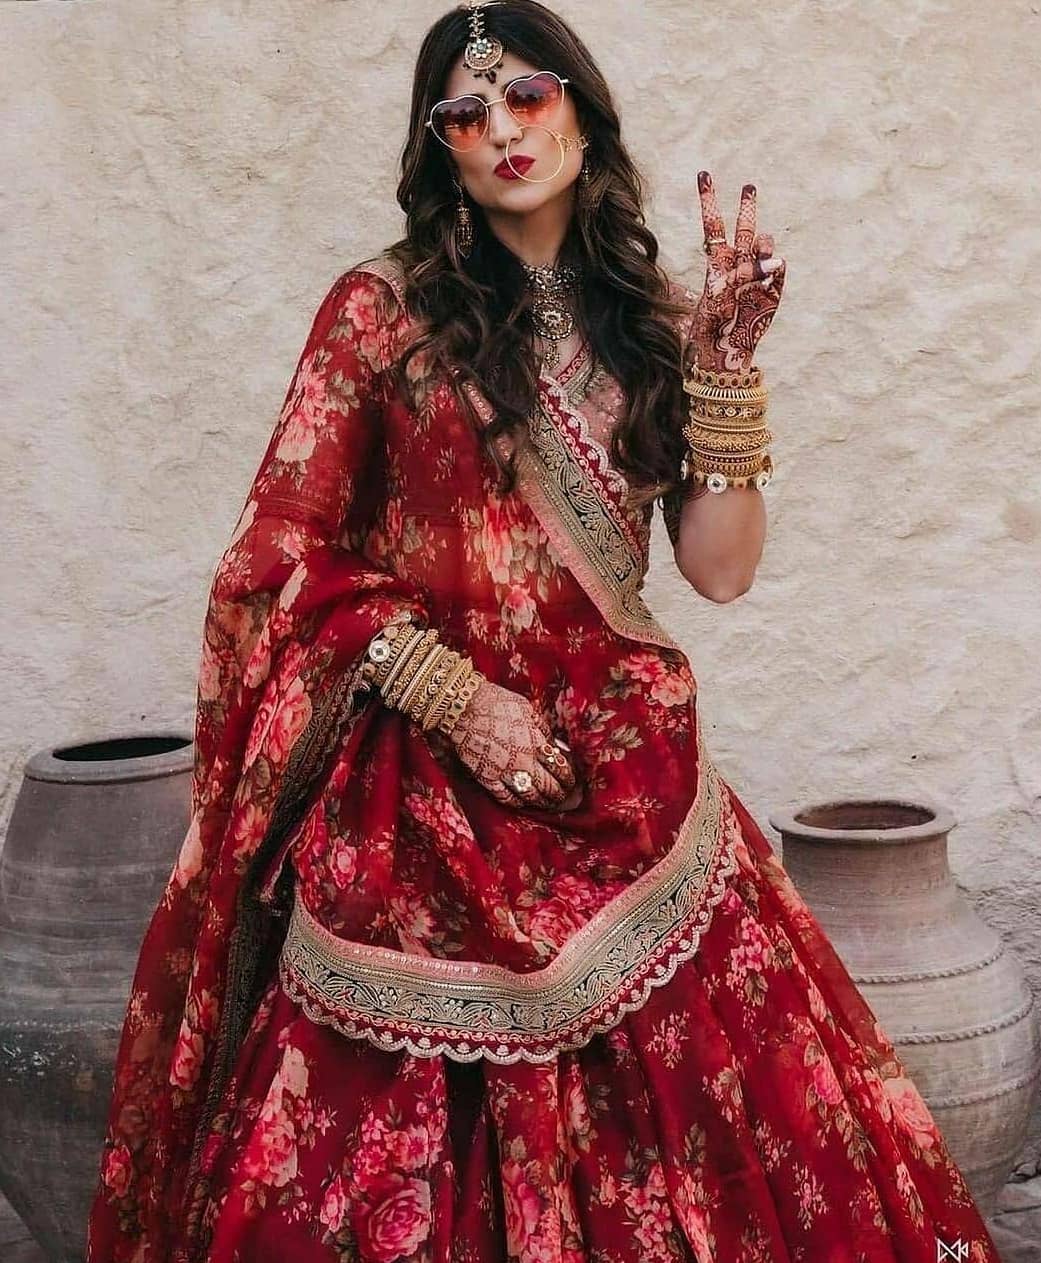 Stunning Gujarati Brides And Their Traditional Sarees | Bride, Traditional  wedding attire, Indian bride outfits